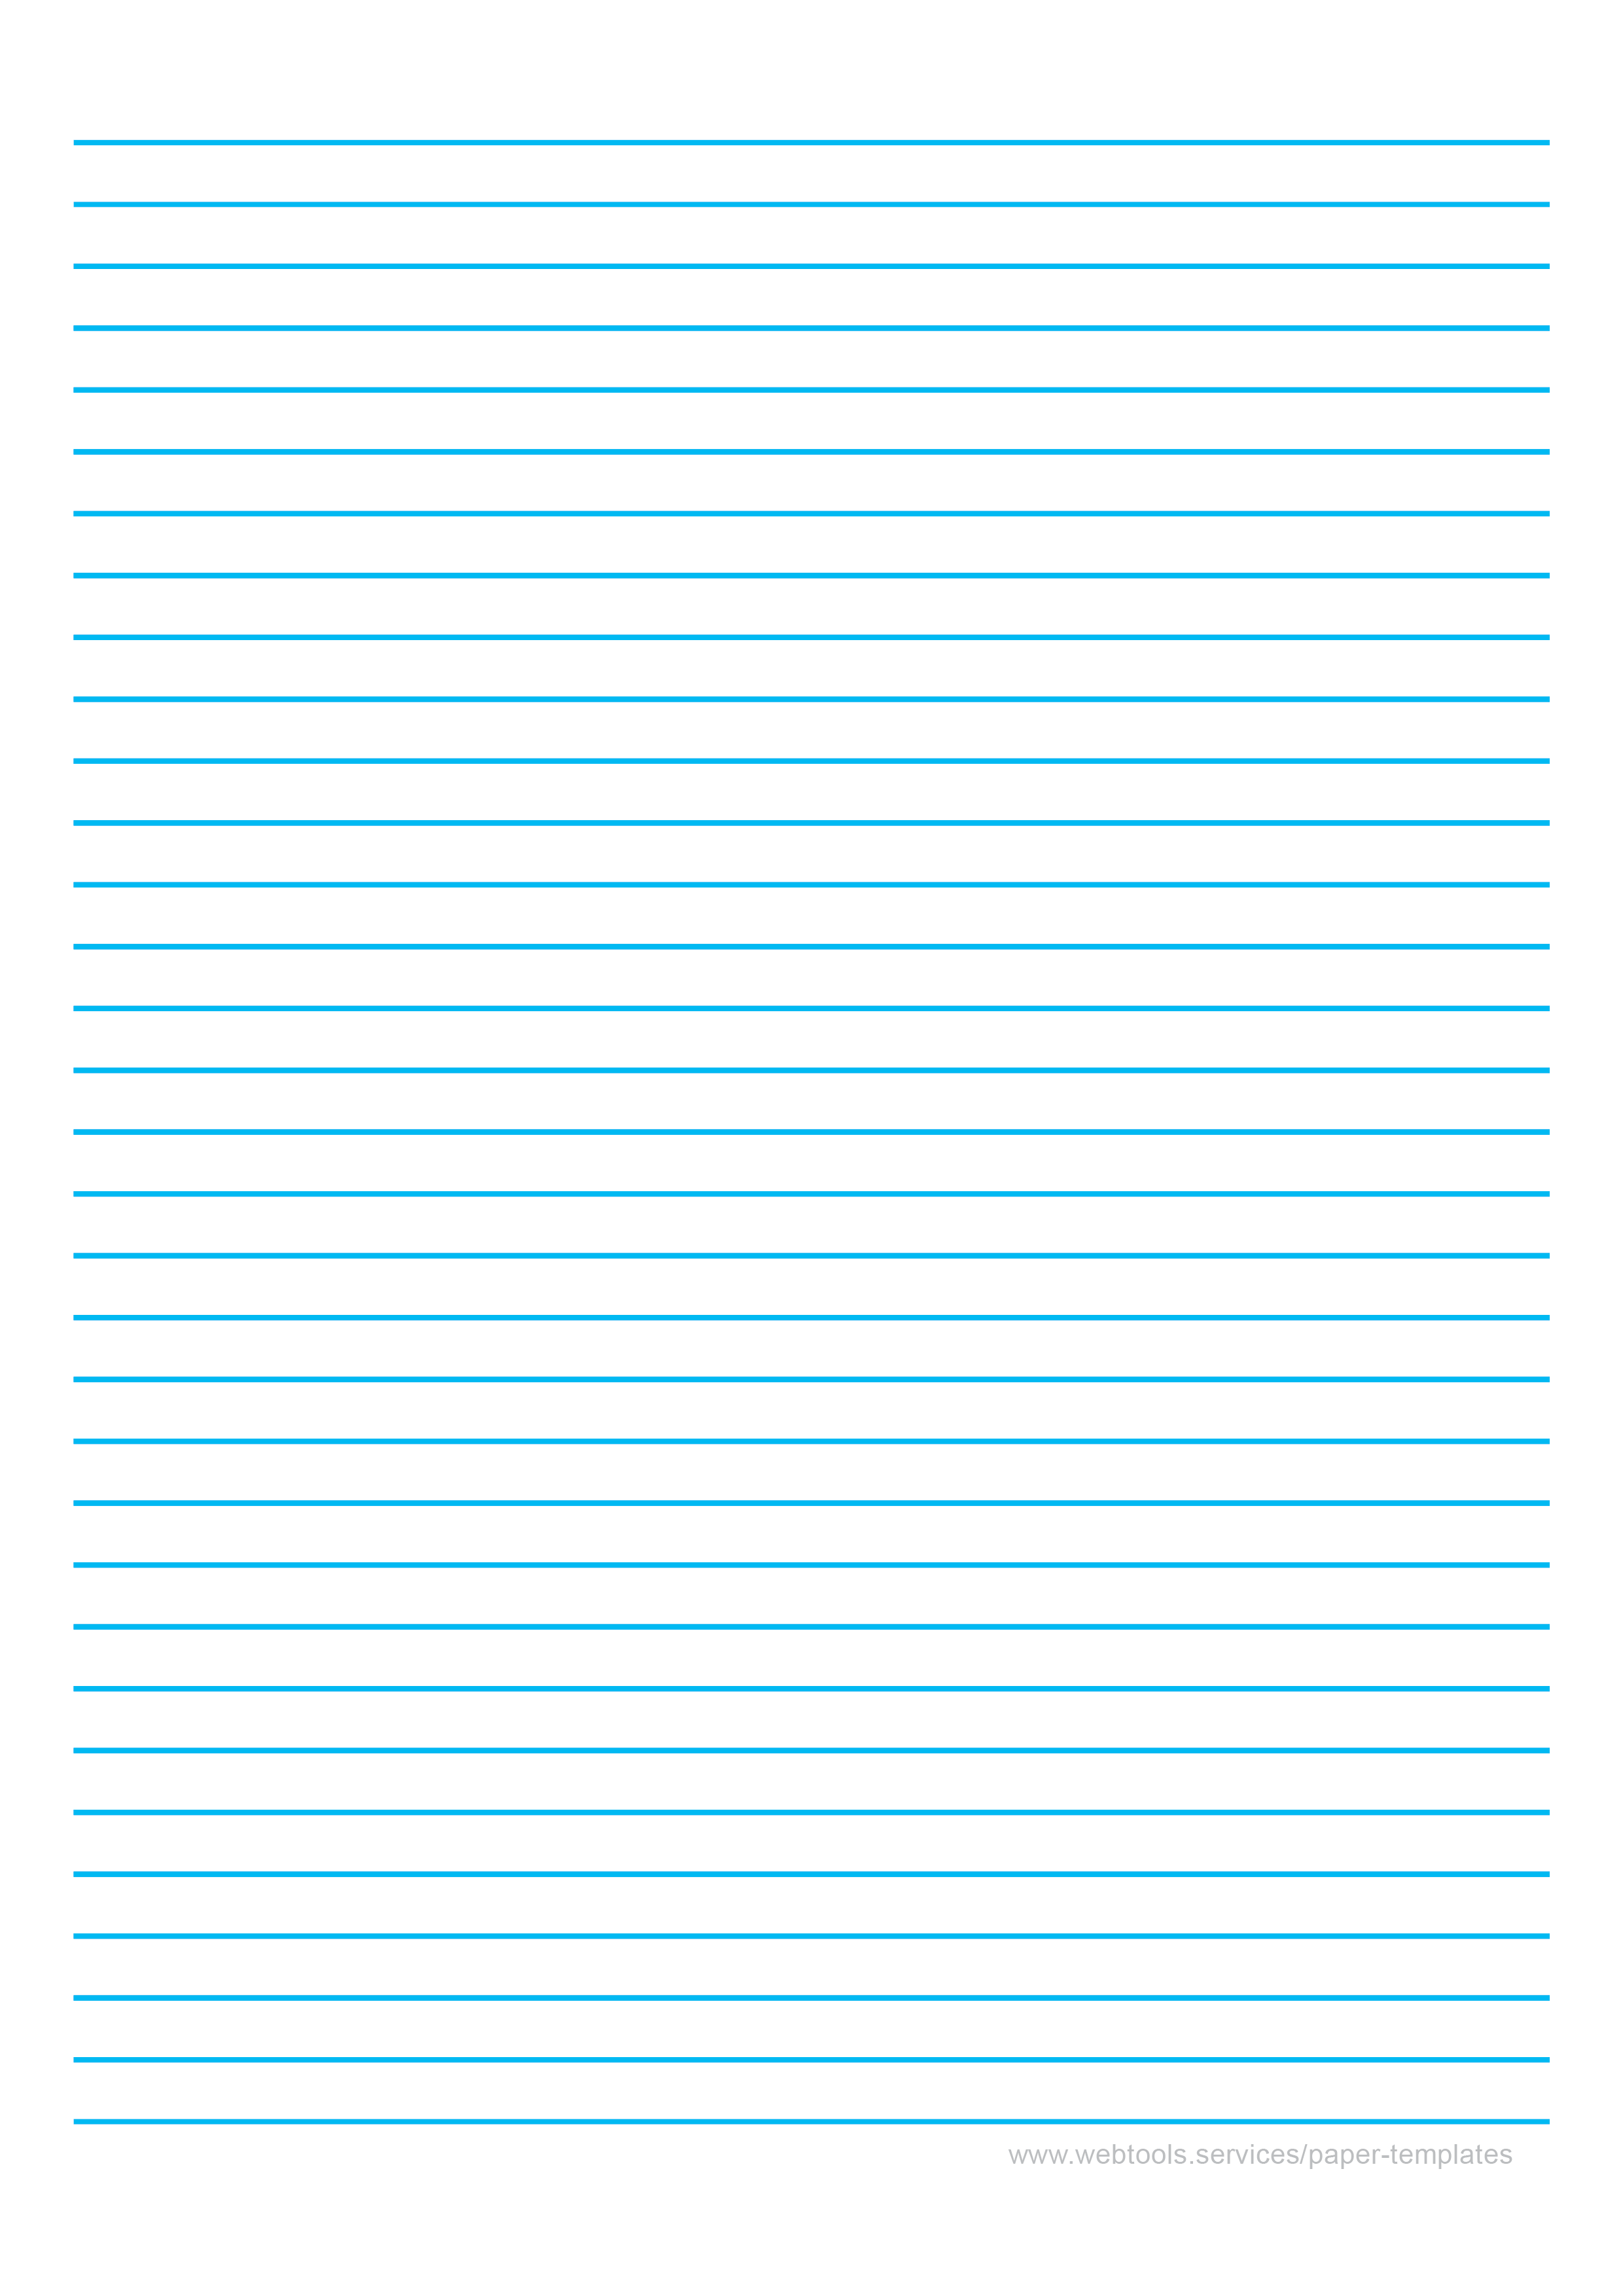 Blue Lined Paper Template with 8mm Line Height